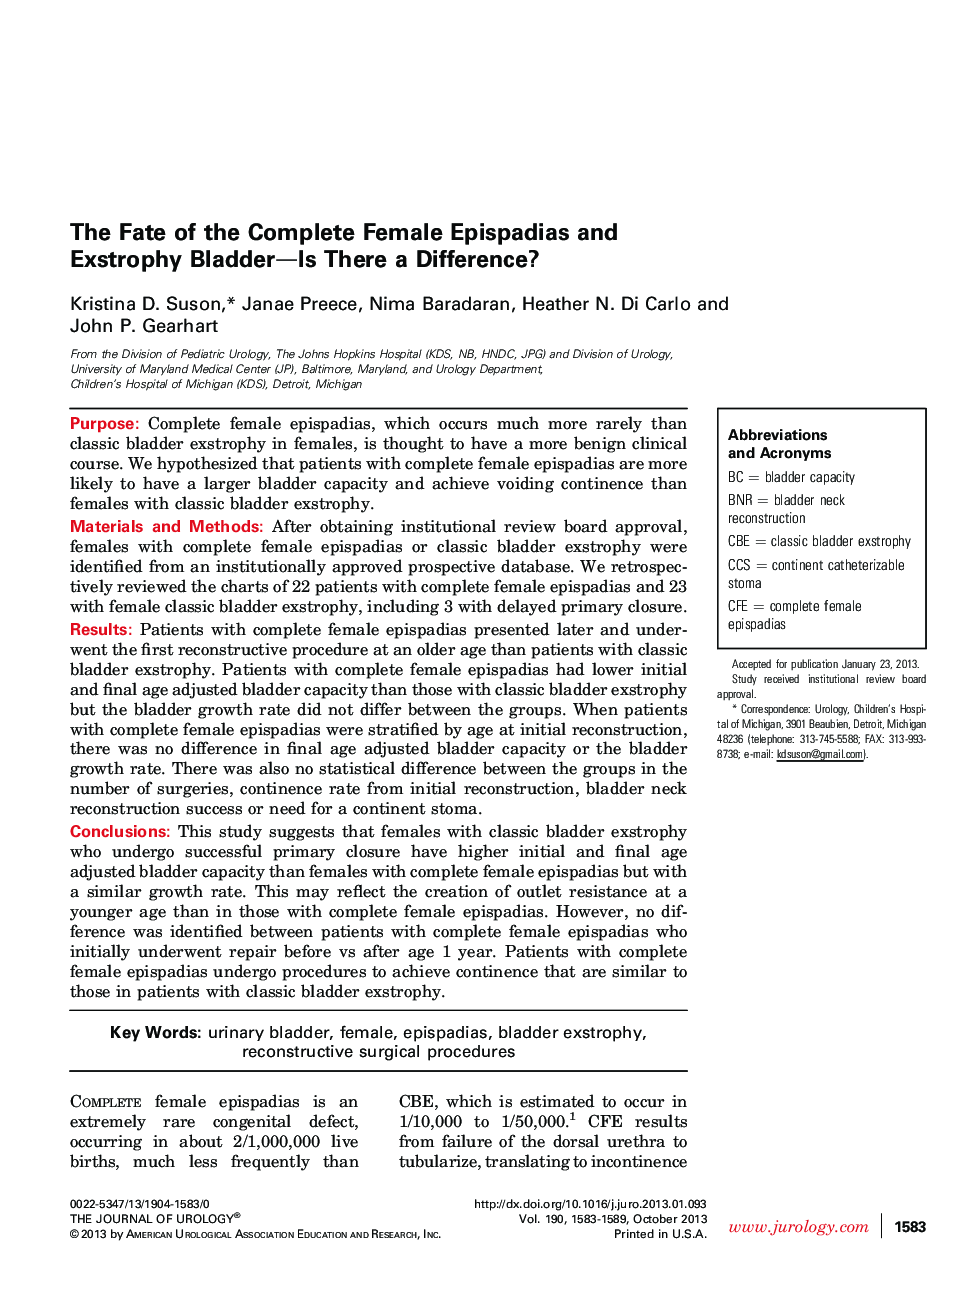 The Fate of the Complete Female Epispadias and Exstrophy Bladder-Is There a Difference?